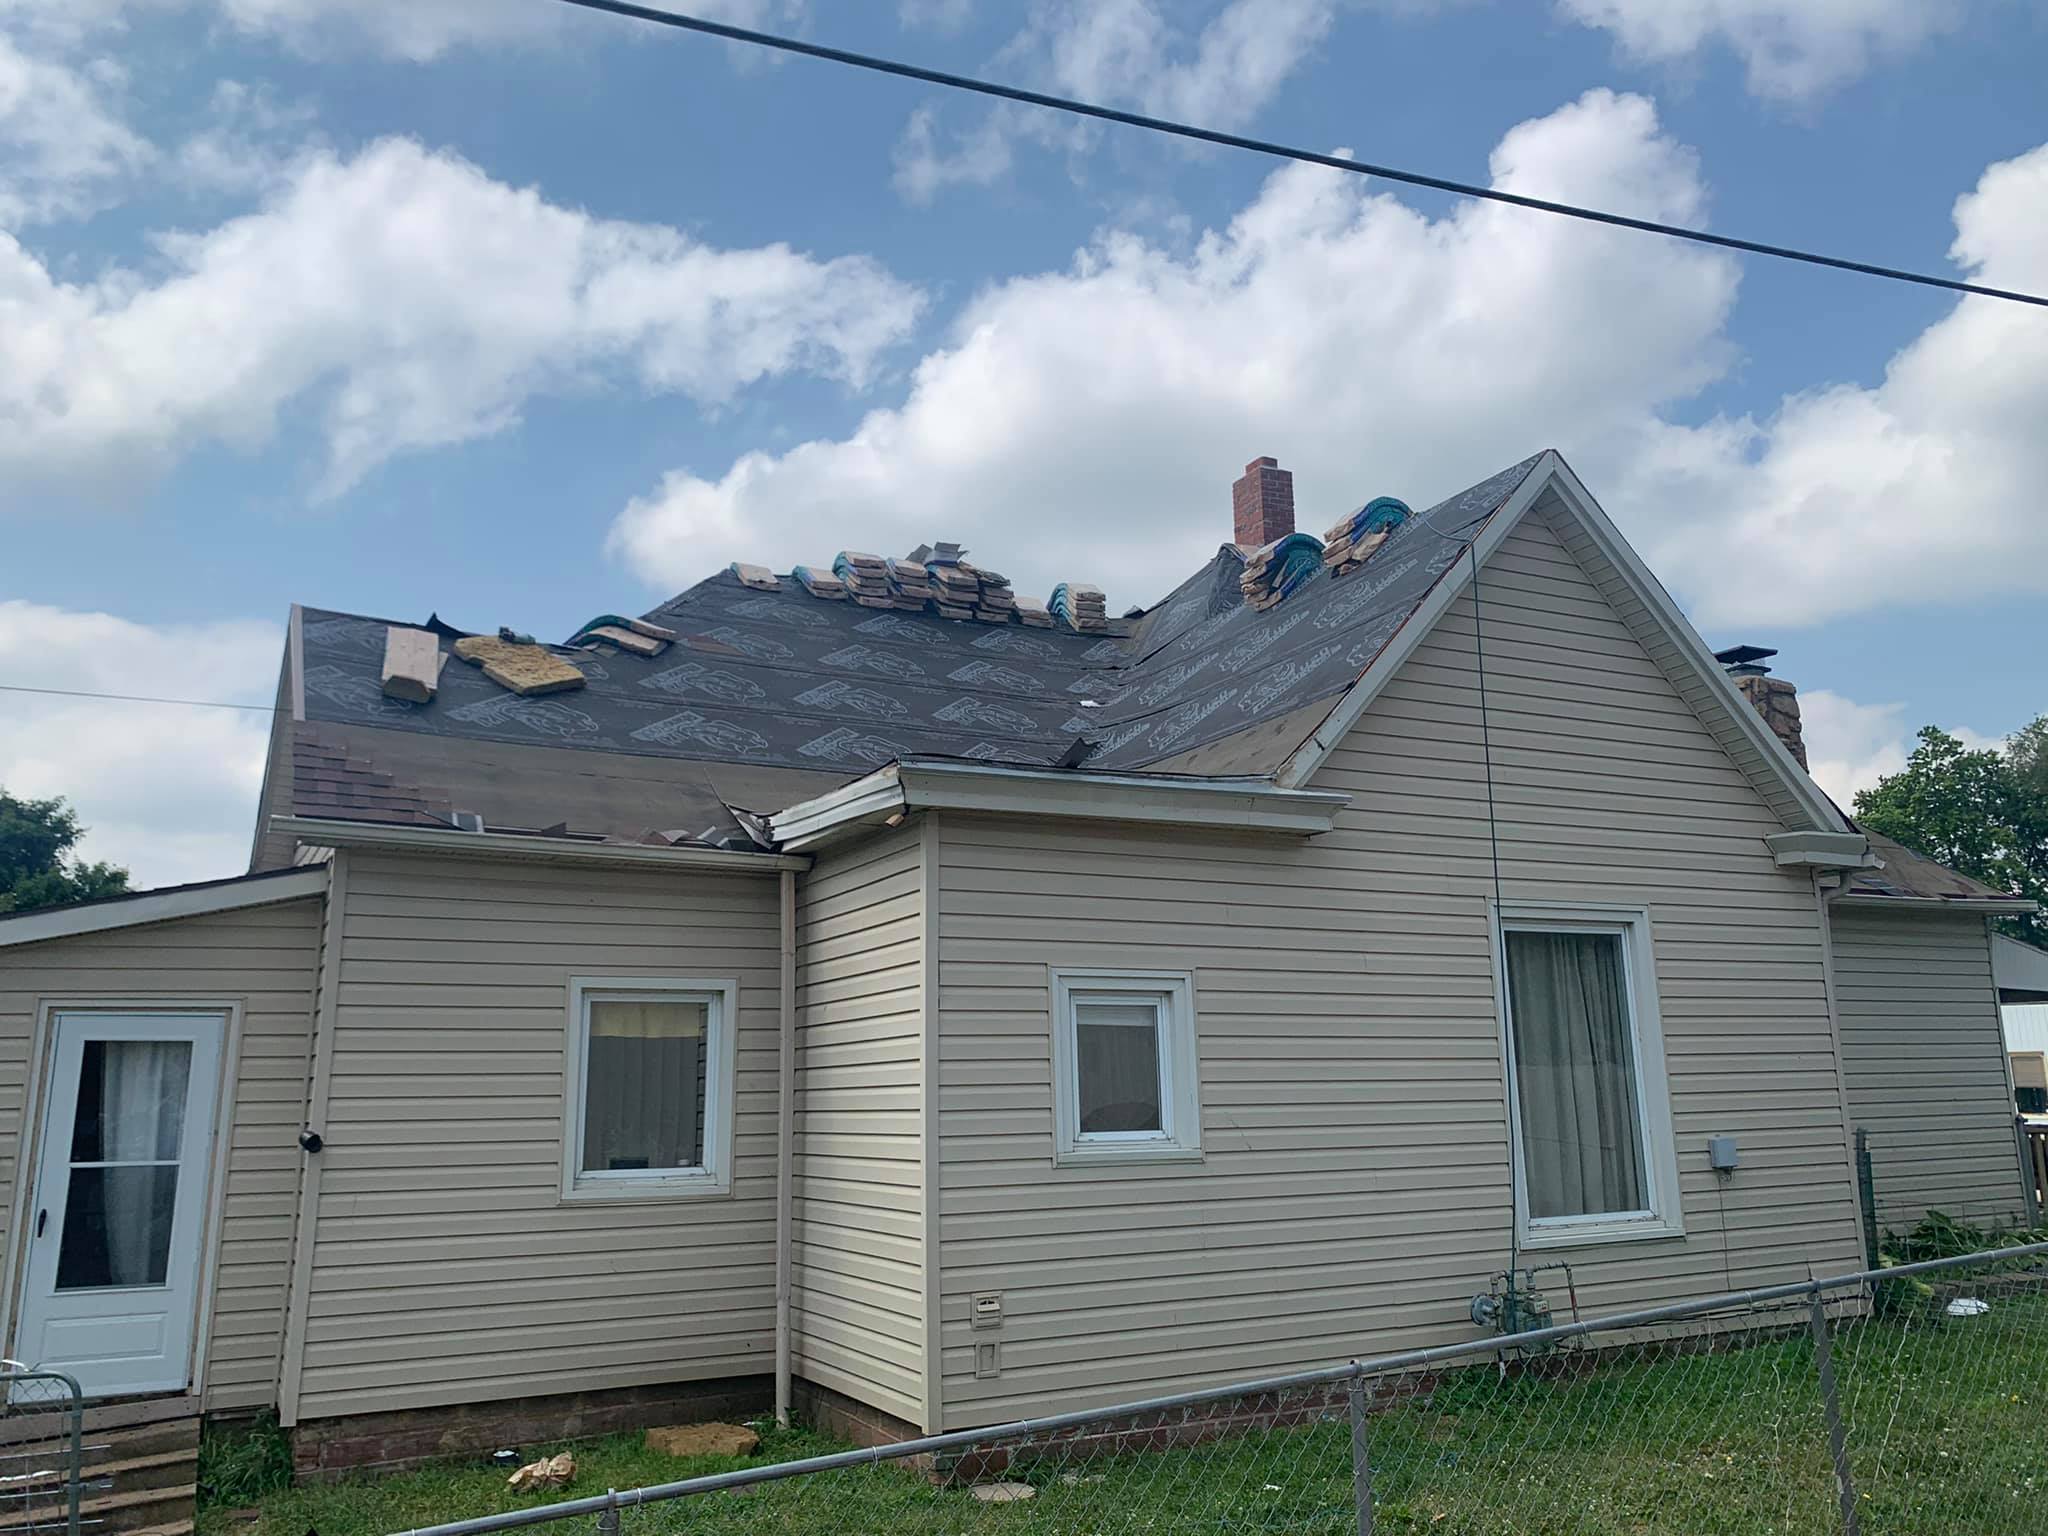 Roofers Cameron Missouri - Finding A Professional